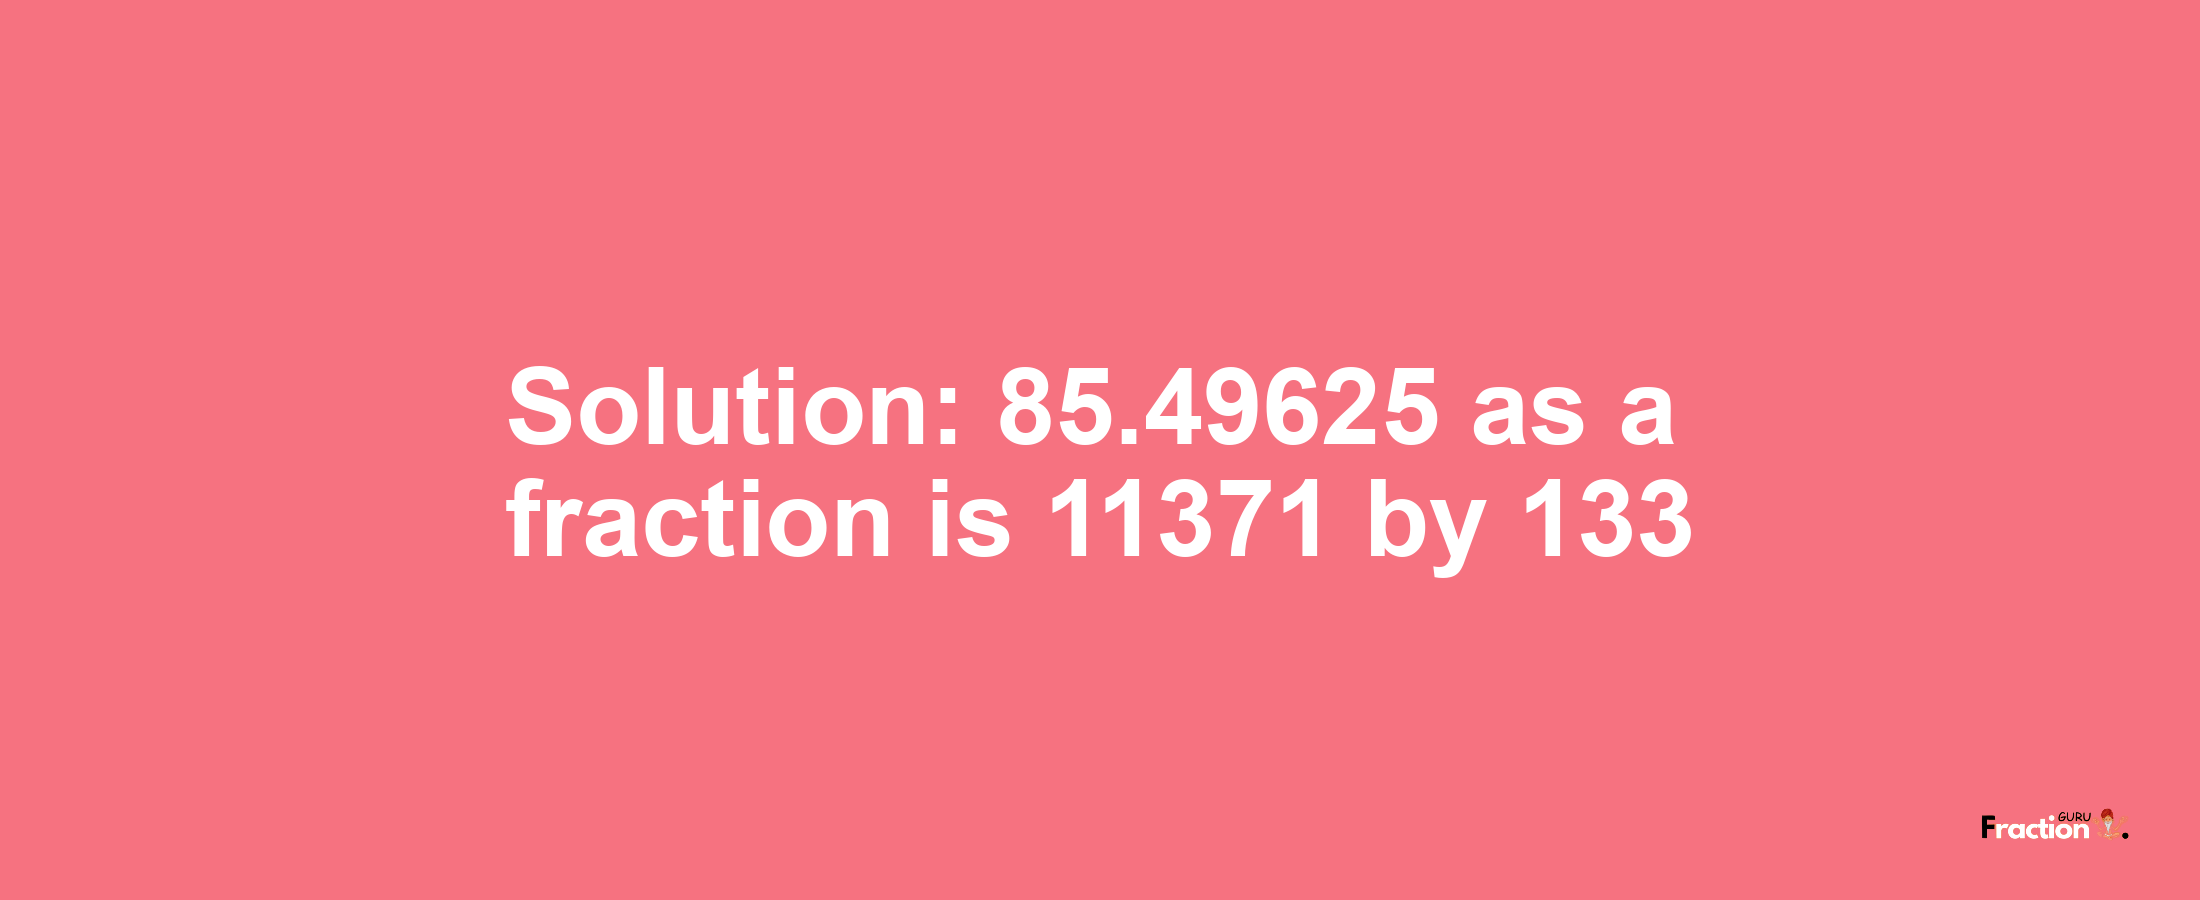 Solution:85.49625 as a fraction is 11371/133